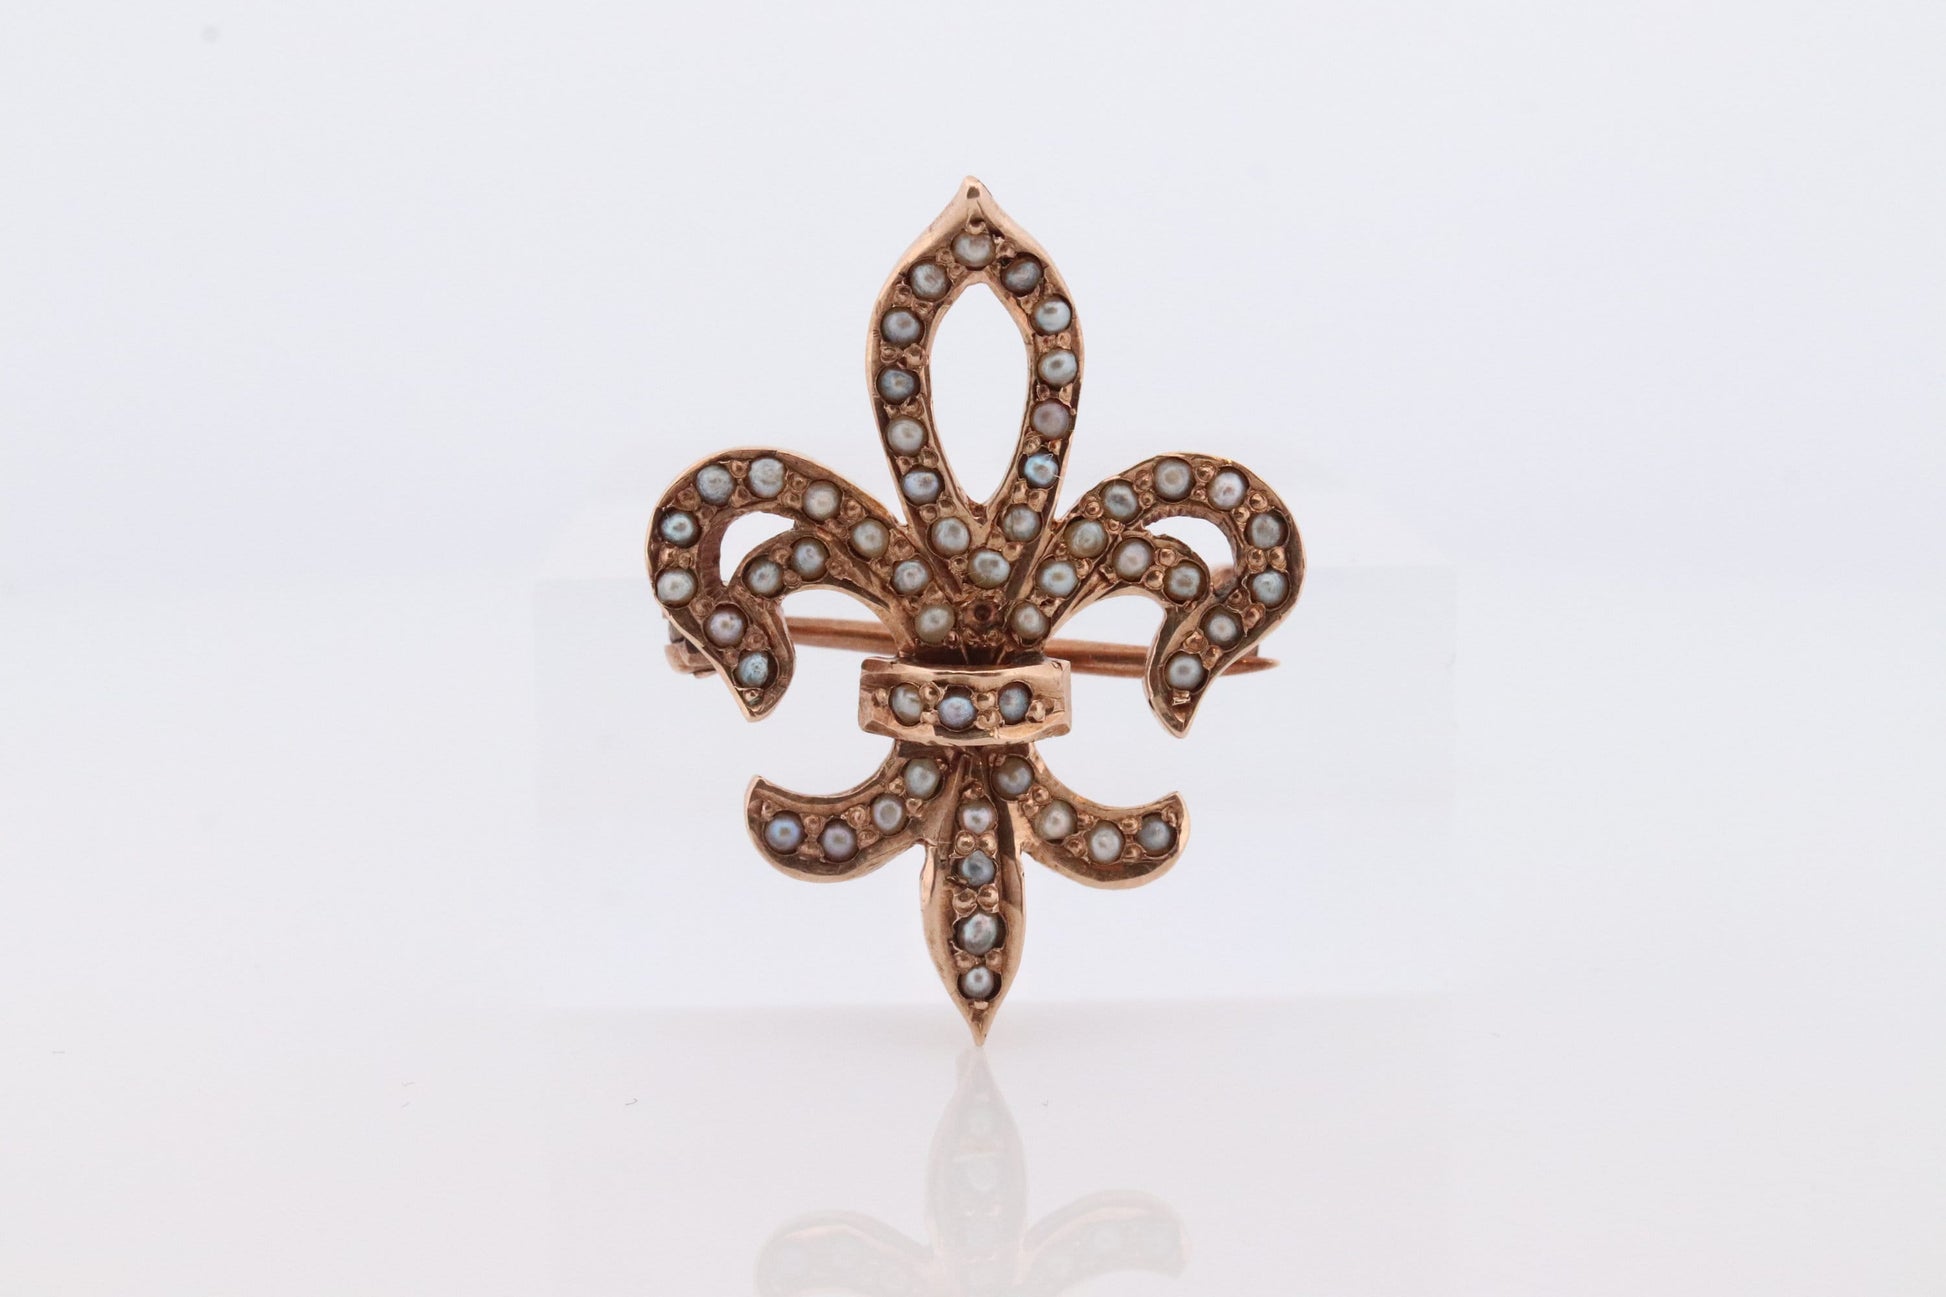 Antique Fluer De Lis Brooch. 10k Pearl Seed encrusted 19th Century French Flower Brooch Pin Pendant. st(115)